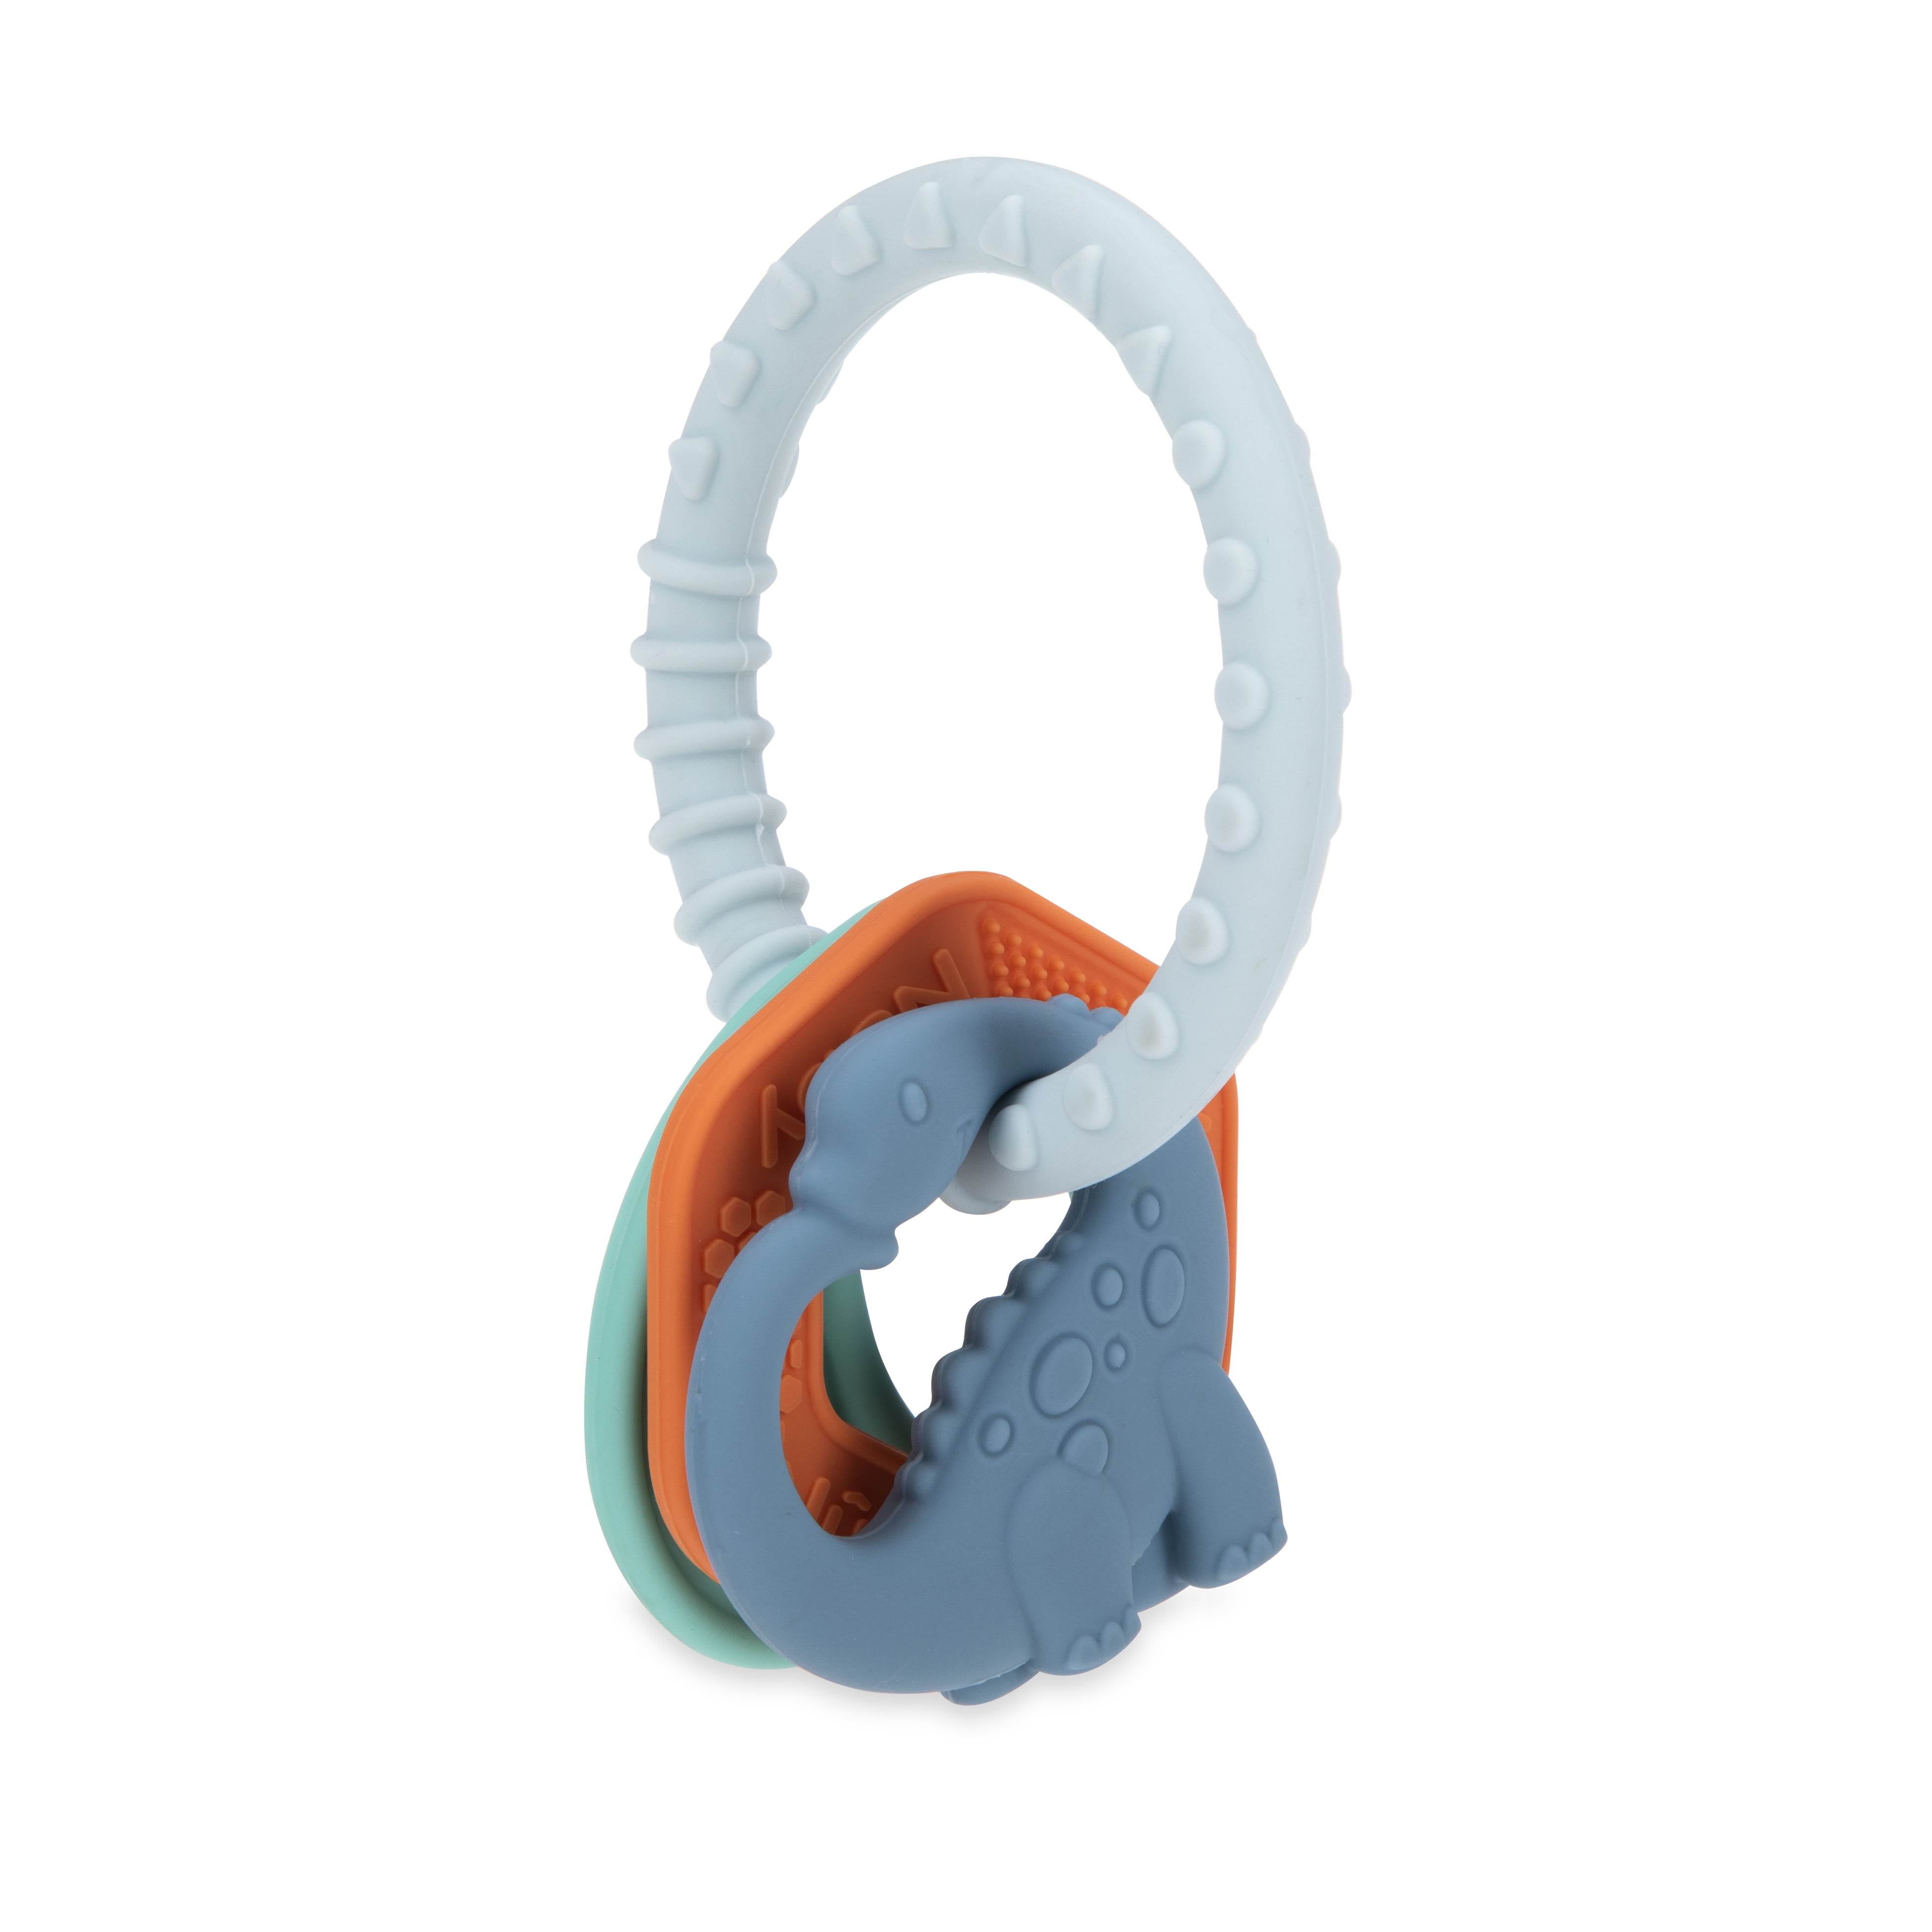 Teether Rings - Soothe Your Childs Gums with Silicone Teething Toys